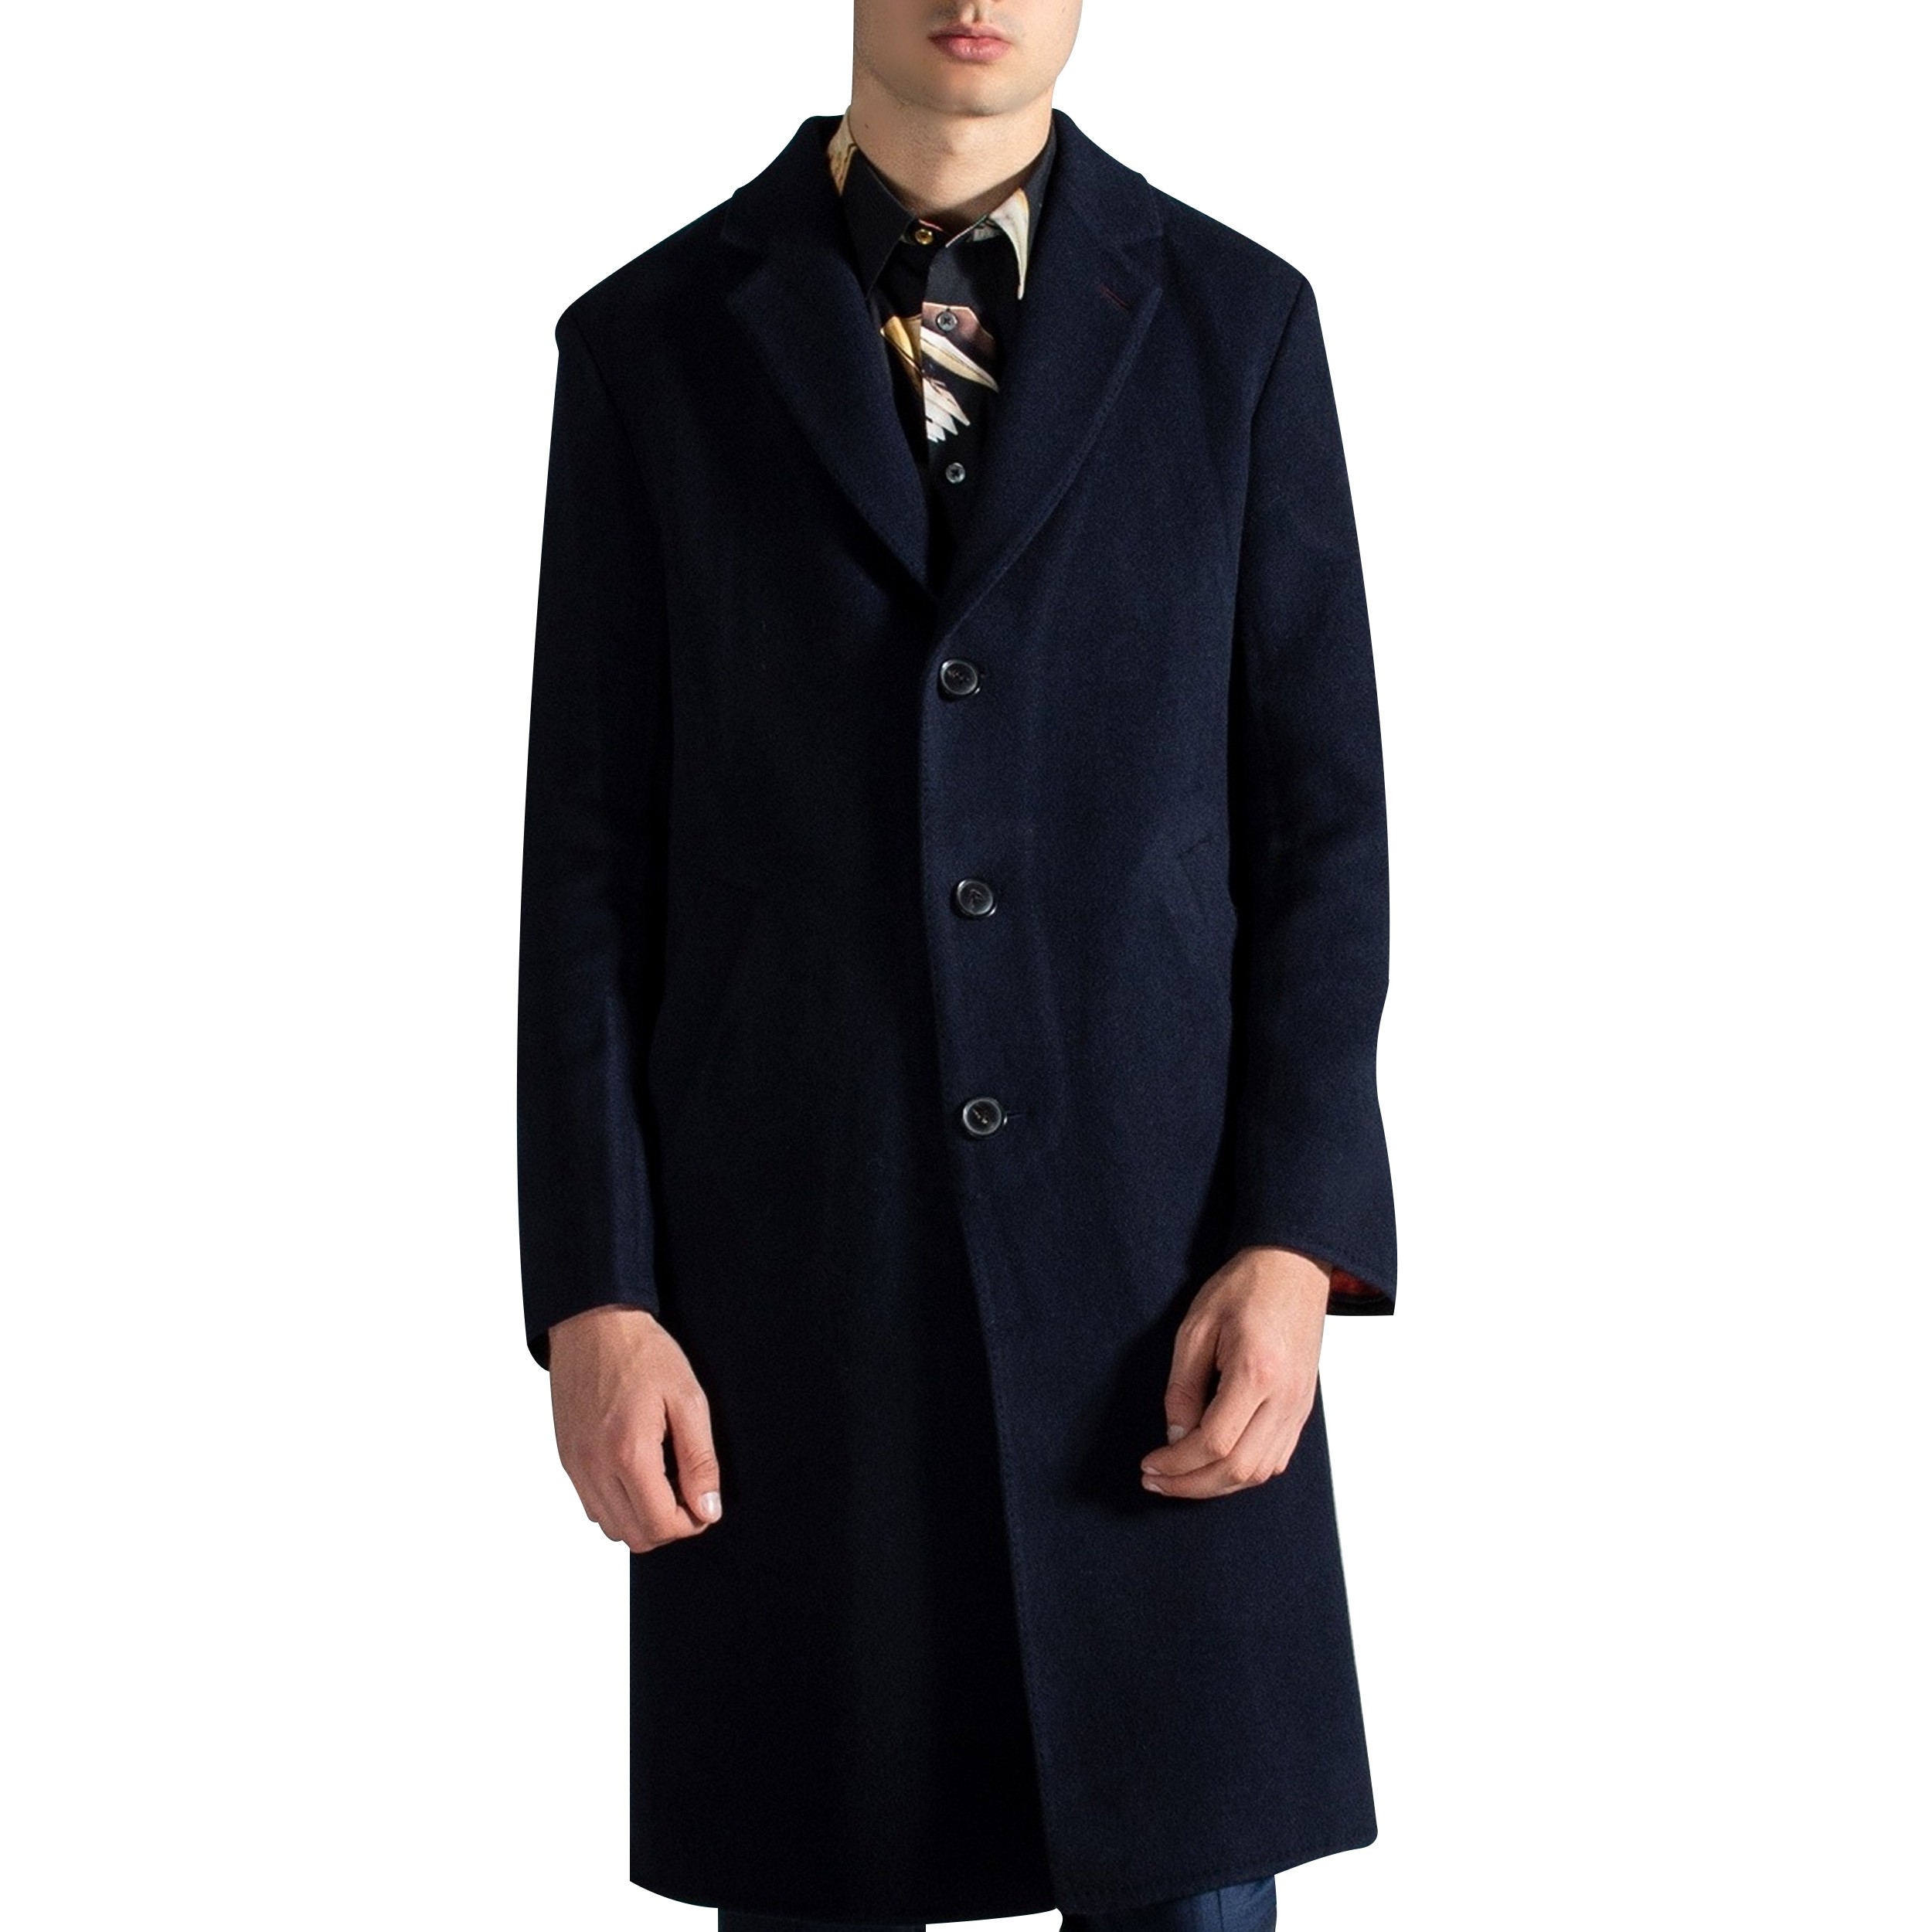 Paul Smith Double Faced Wool-Blend Overcoat Navy